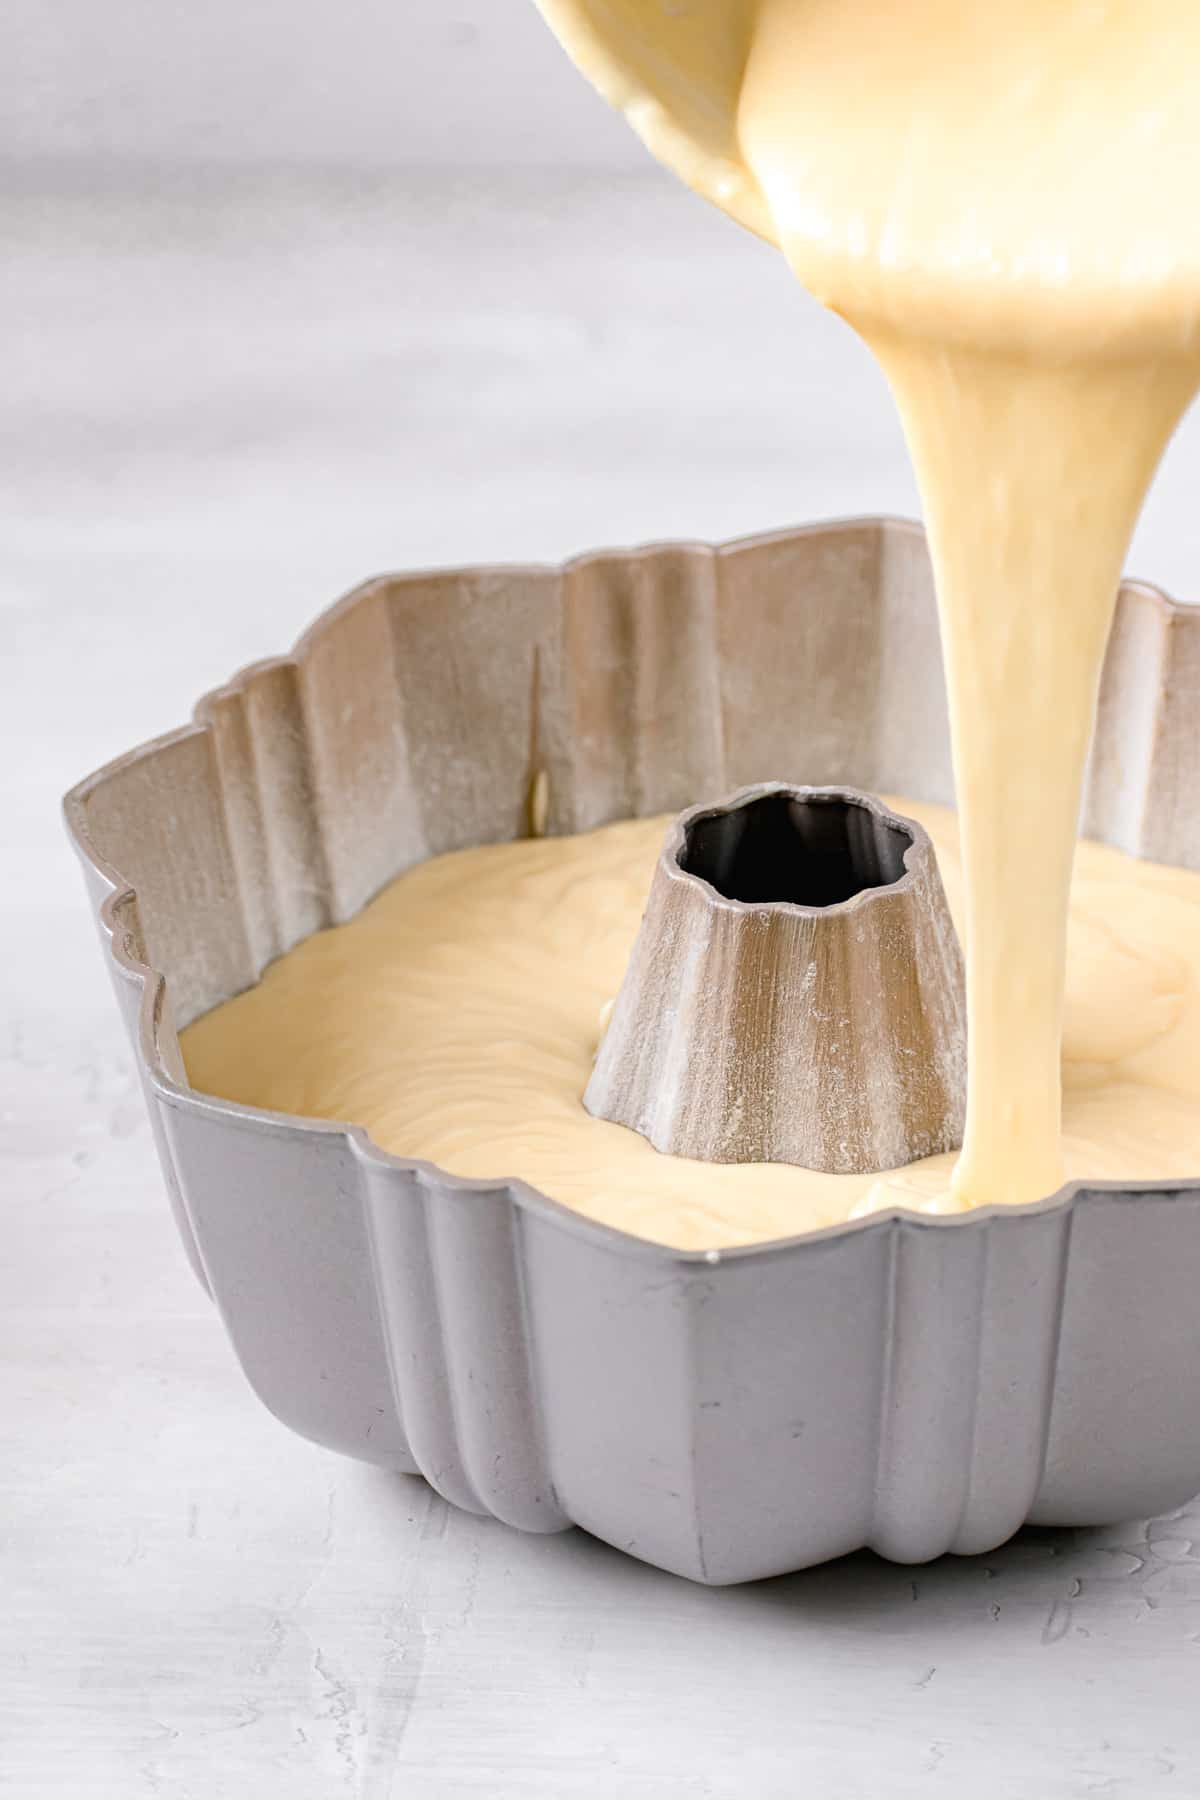 batter being poured into bundt pan.